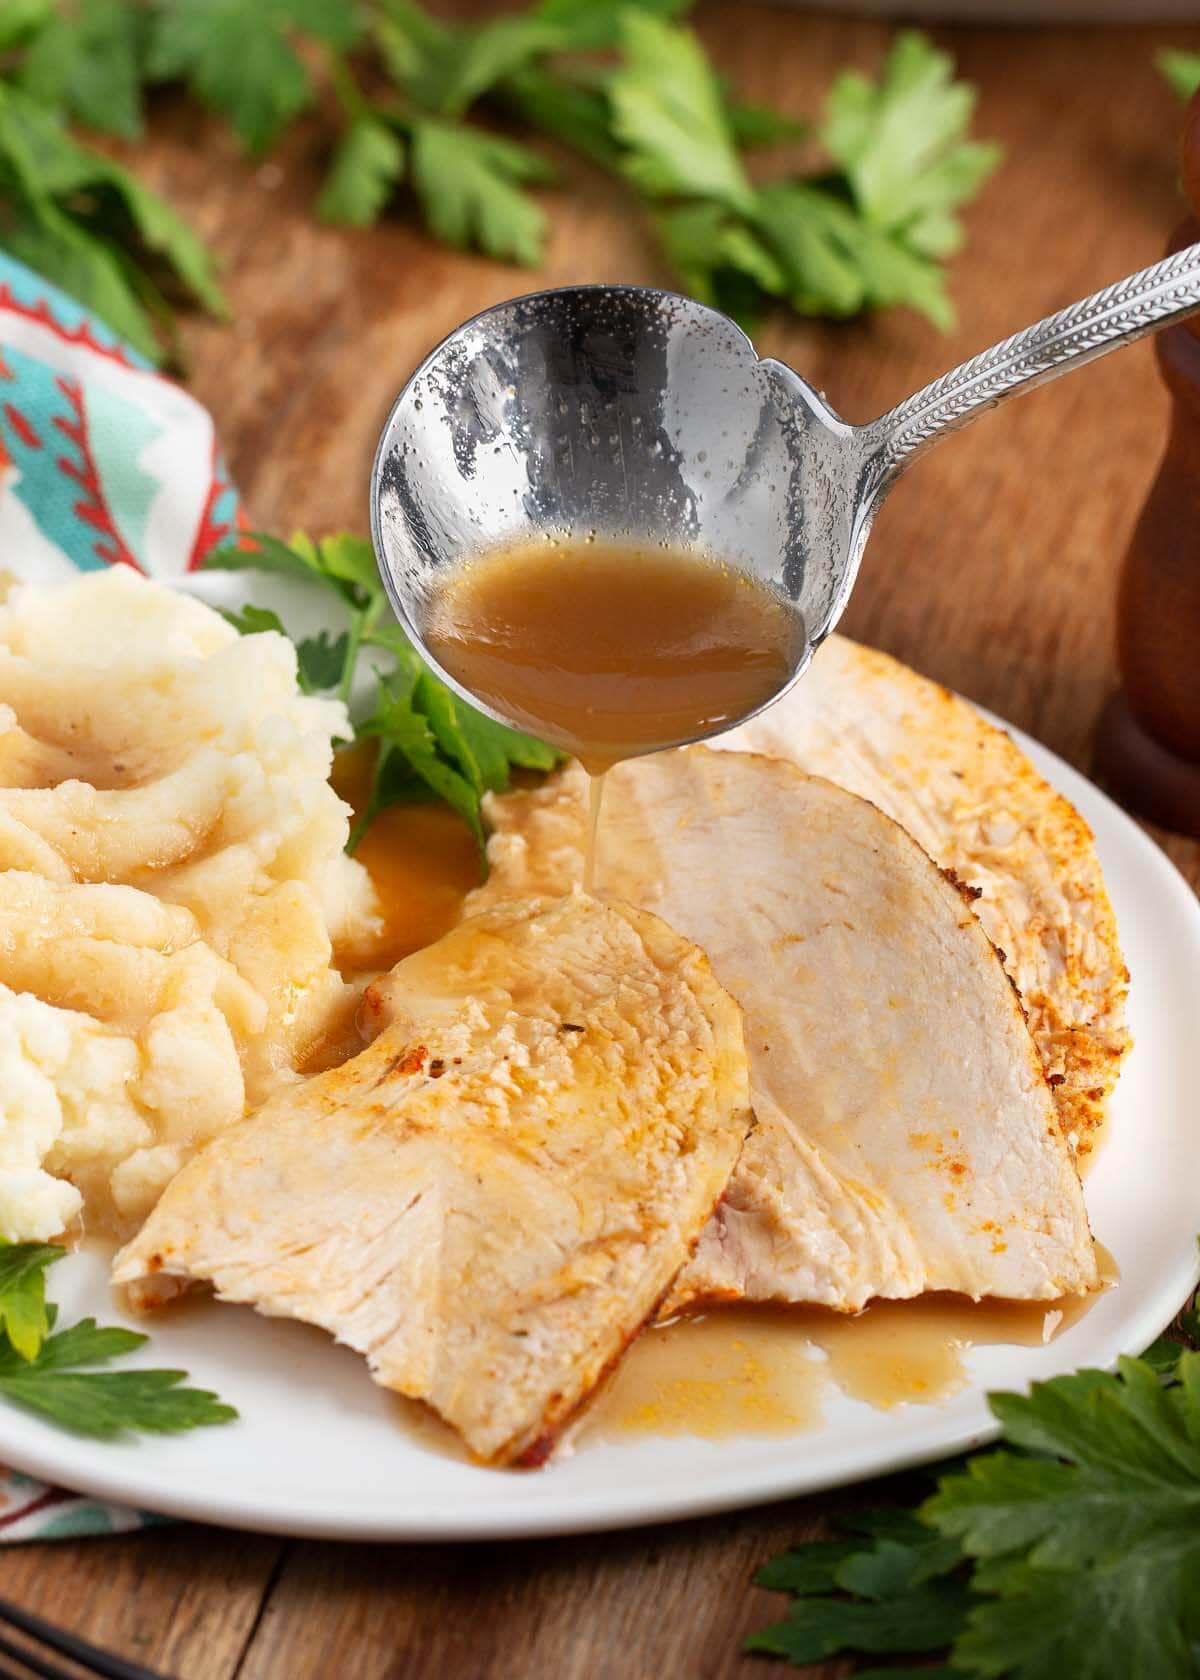 Chicken slices on a white plate with potatoes and ladle with gravy